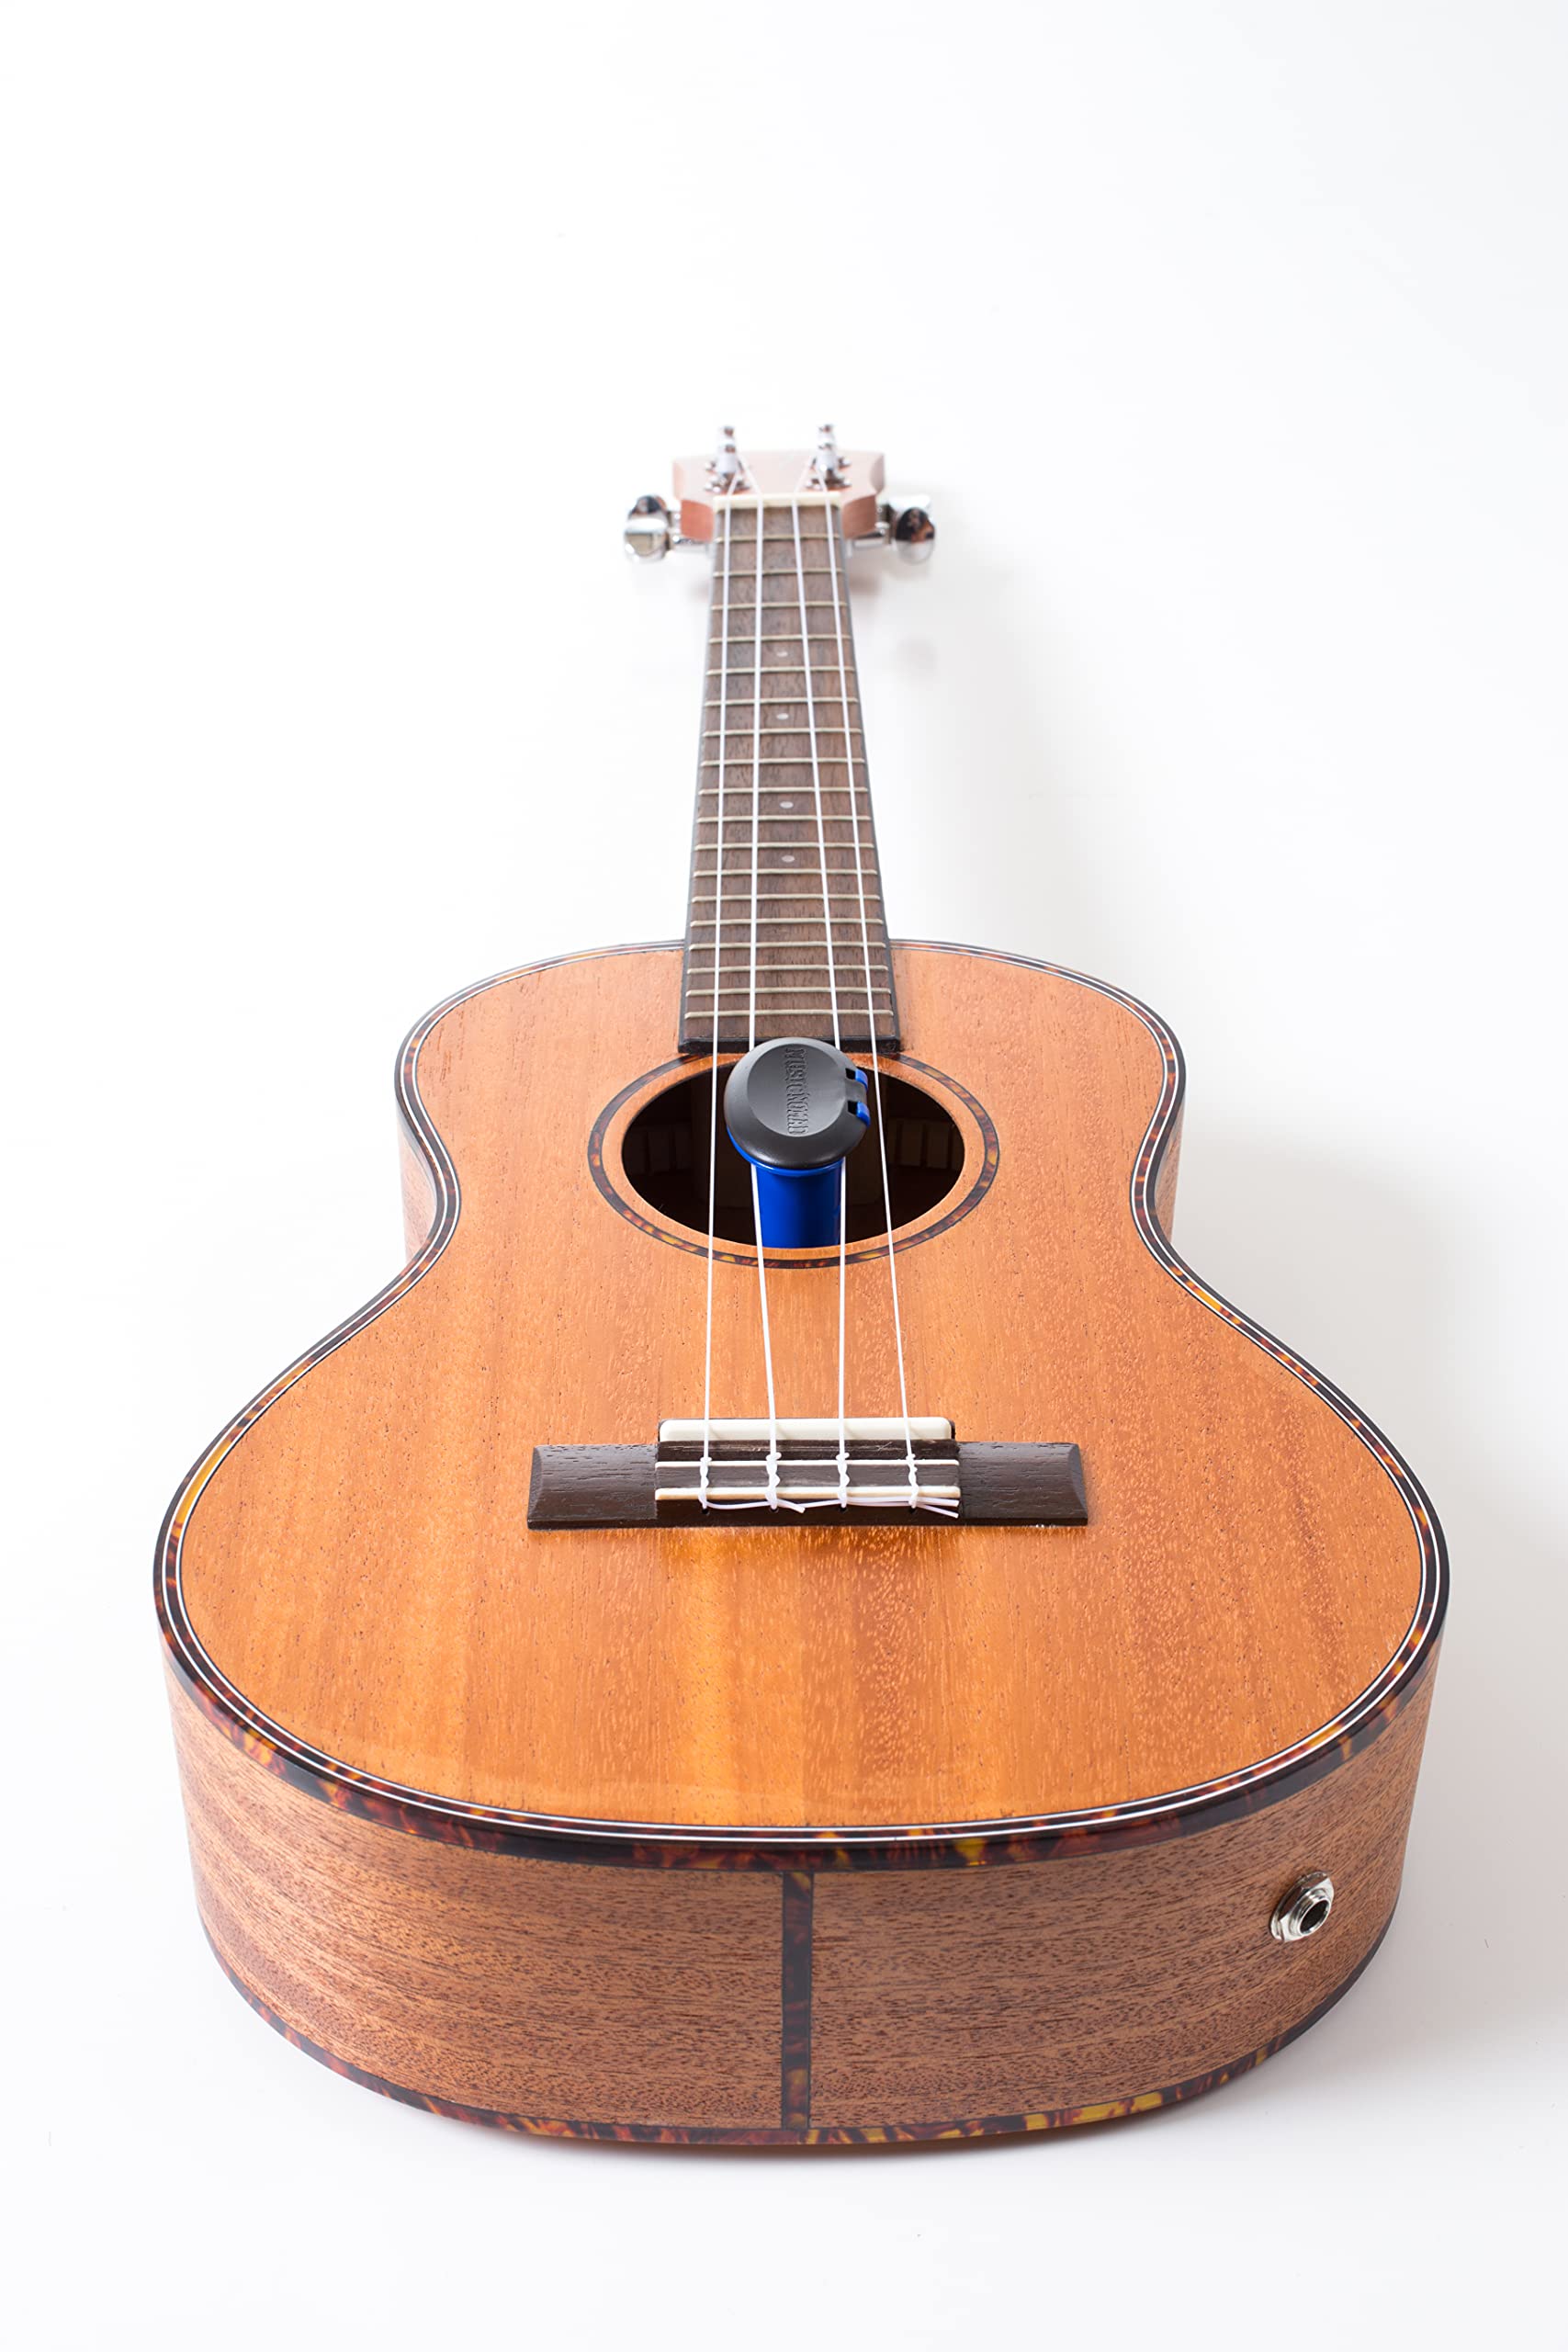 Oasis OH-18 Ukulele Humidifier Review